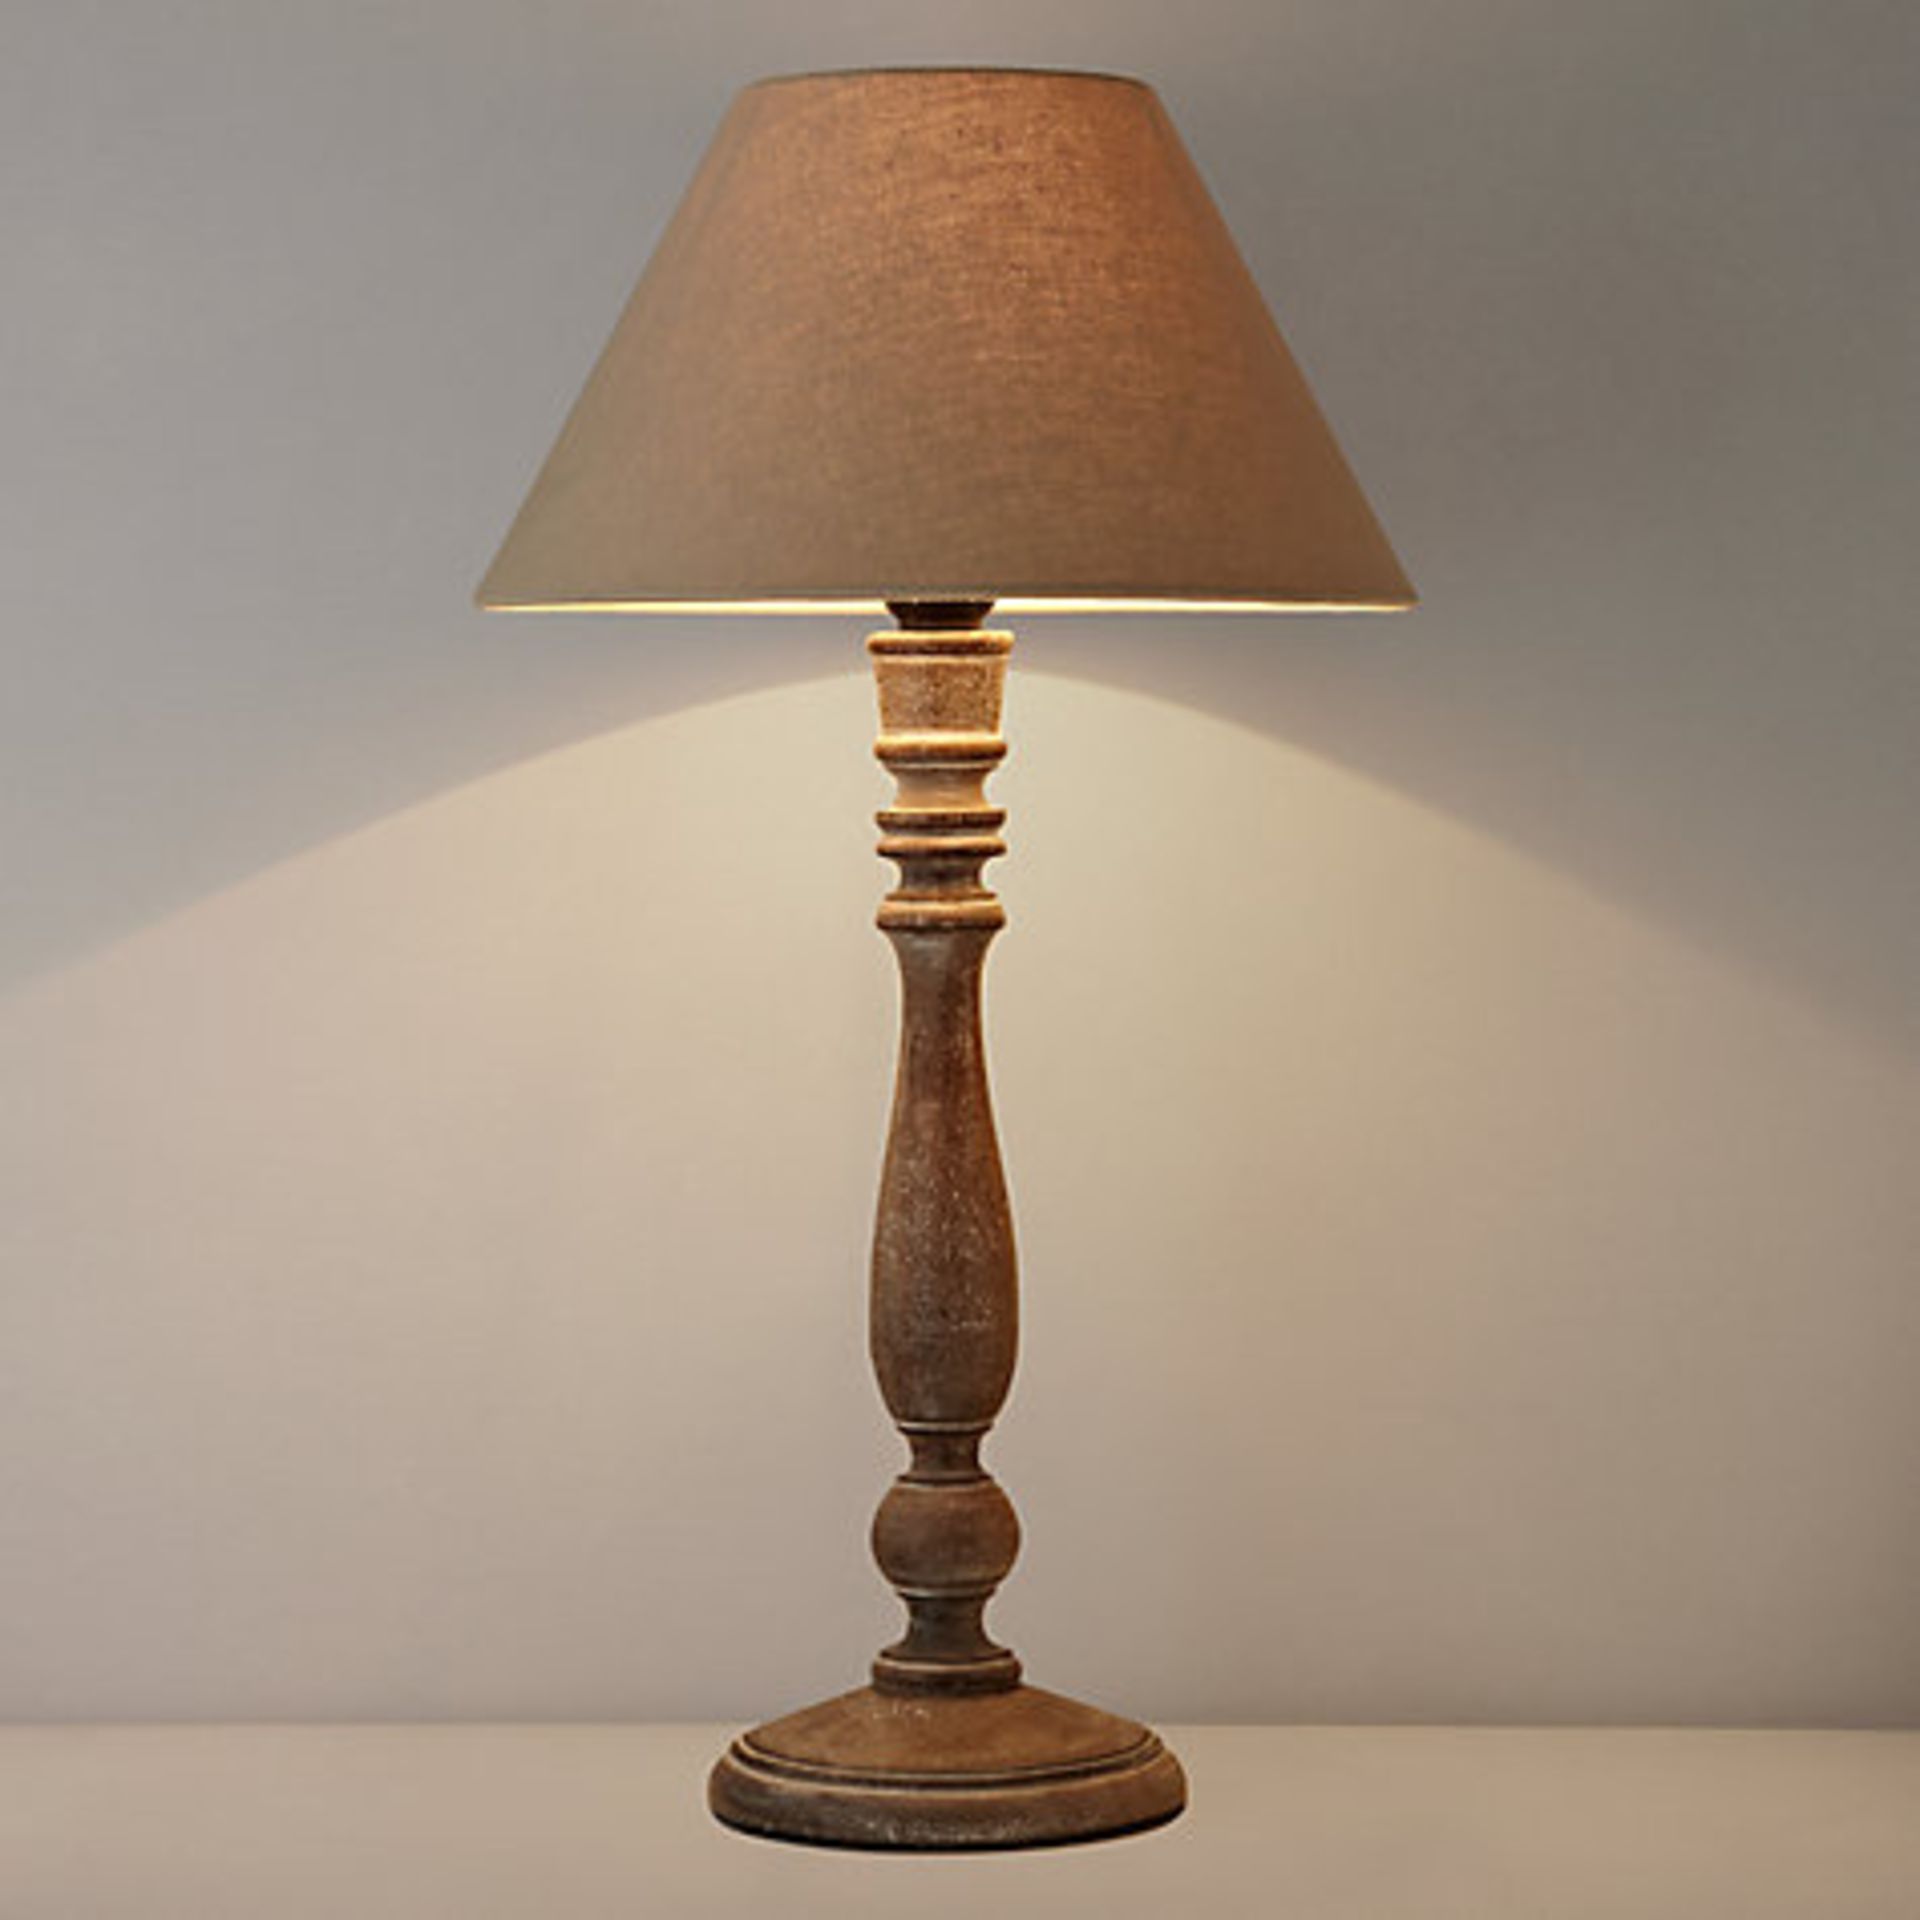 1 x BOXED RUPERT RUBBED WOOD TABLE LAMP (70622111) RRP £65  *PLEASE NOTE THAT THE BID PRICE IS